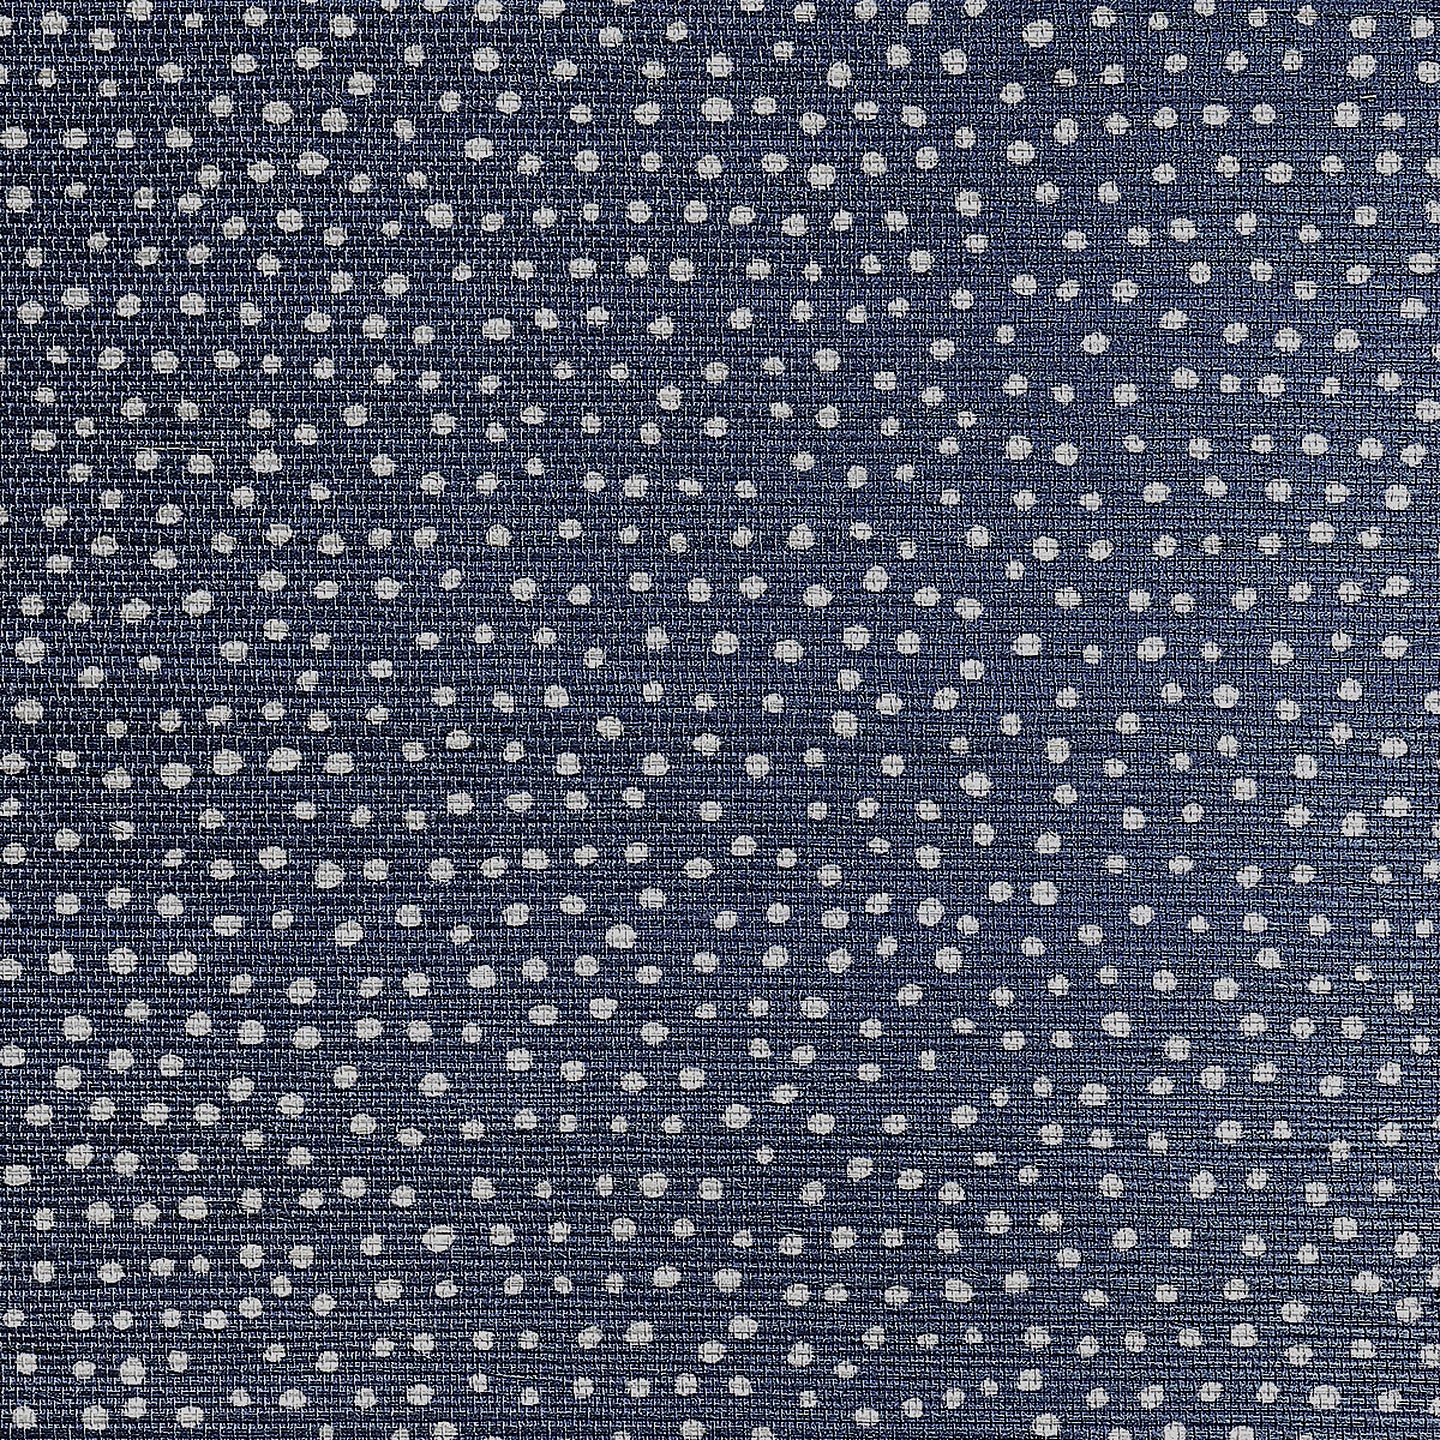 Purchase Phillip Jeffries Wallpaper - 10012, Droplets - Denim With White 